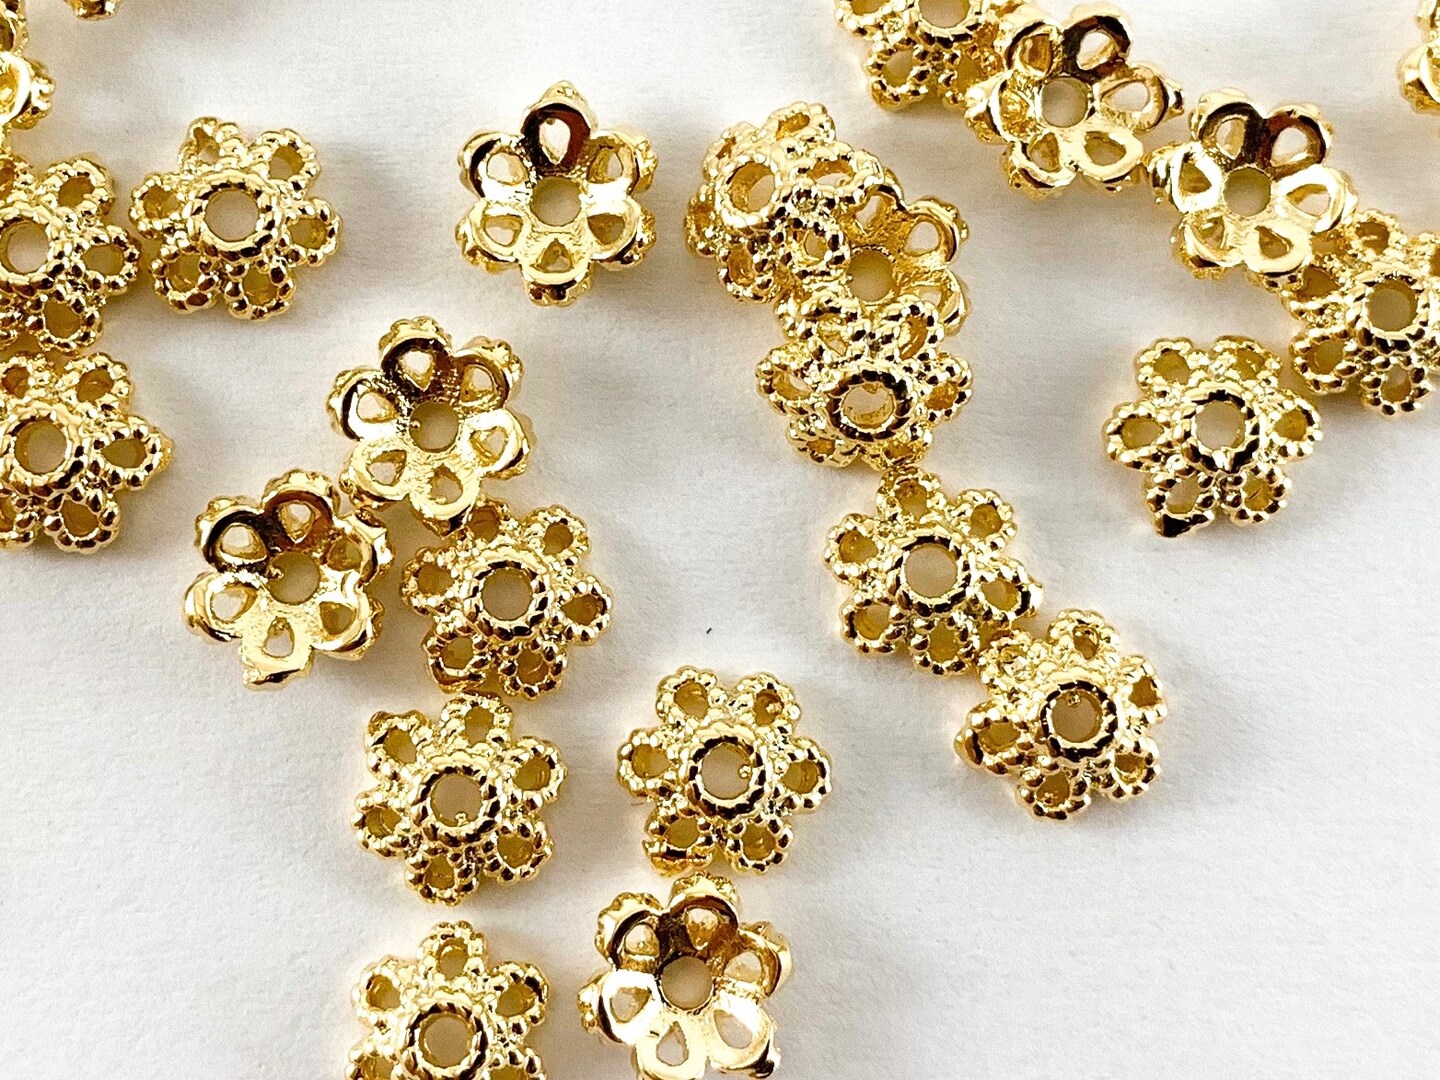 18K Gold Plated Flower Bead Caps 8mm in Brass 10pcs